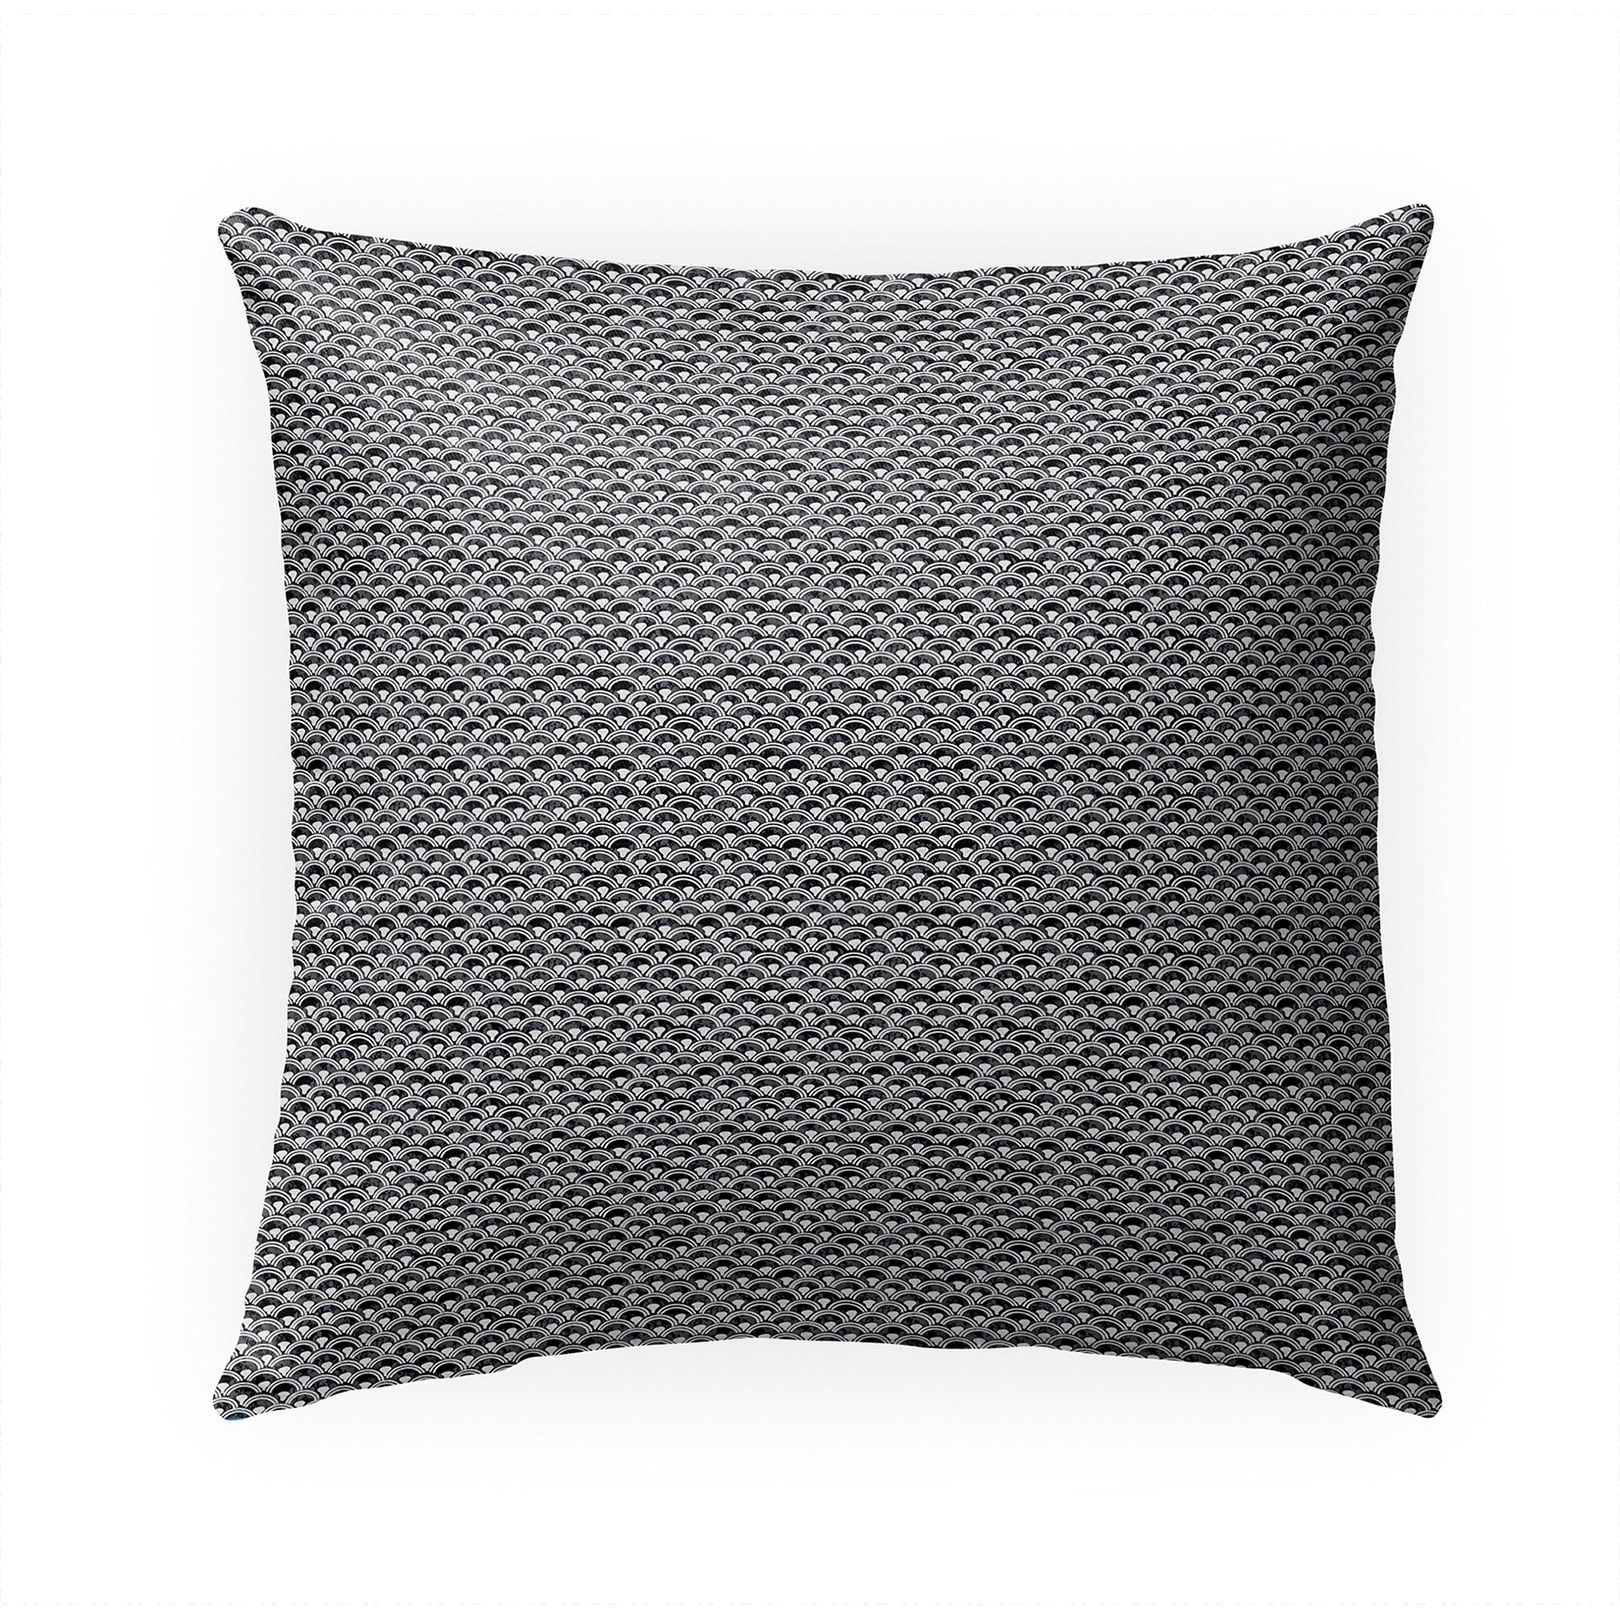 FISH SCALES BW Indoor|Outdoor Pillow By Kavka Desi...